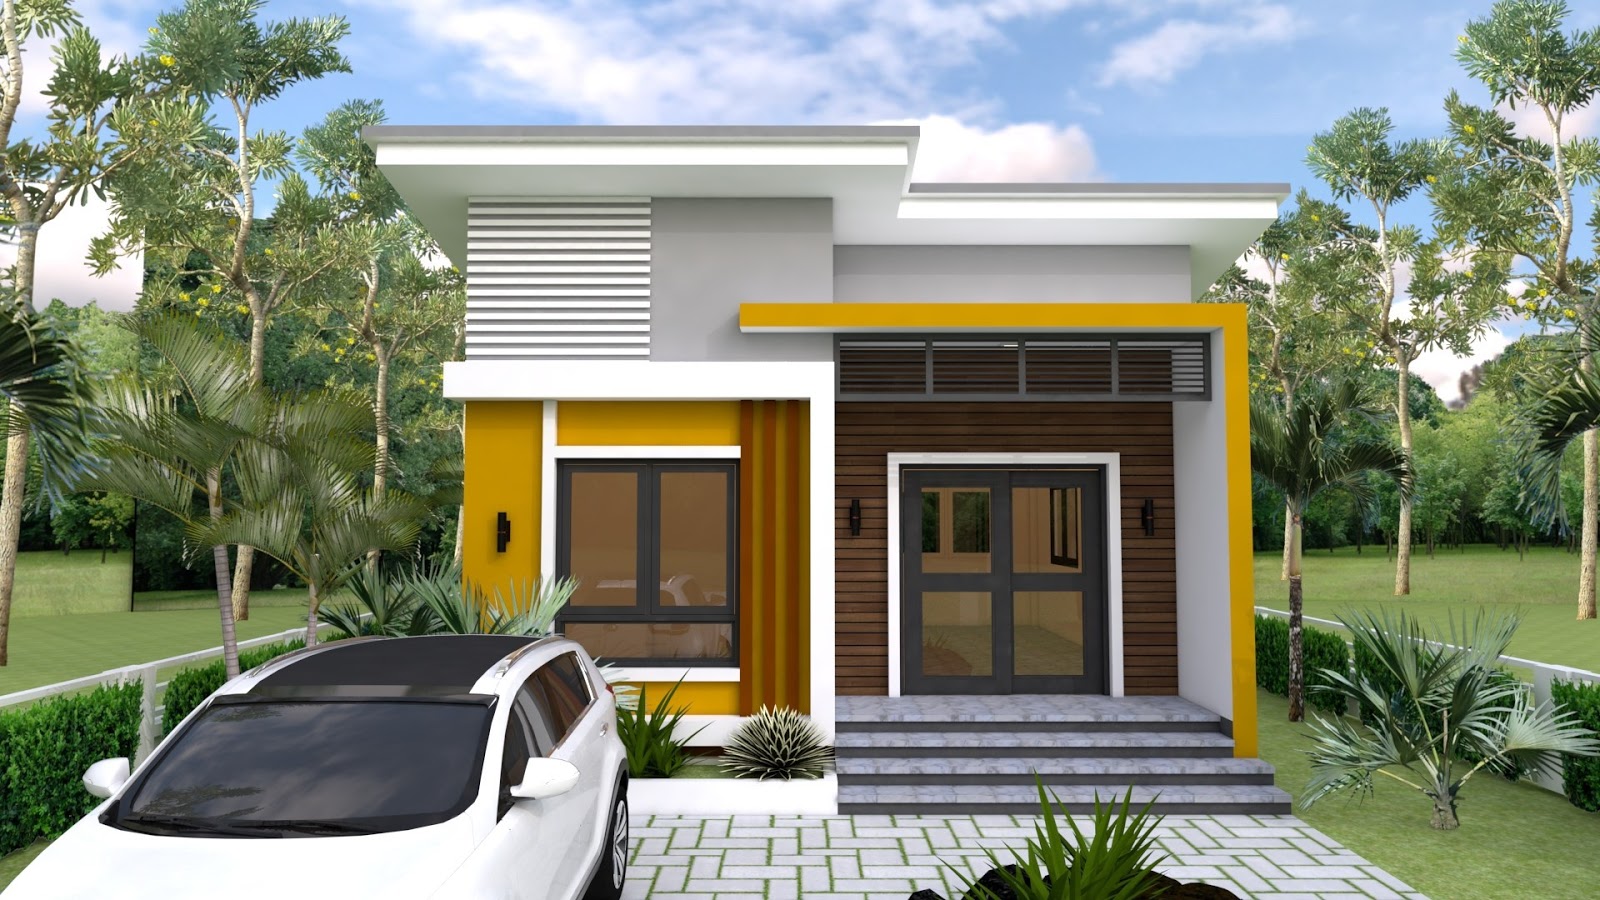 2 bedroom  house  plans  indian  style  Best House  Plan  Design